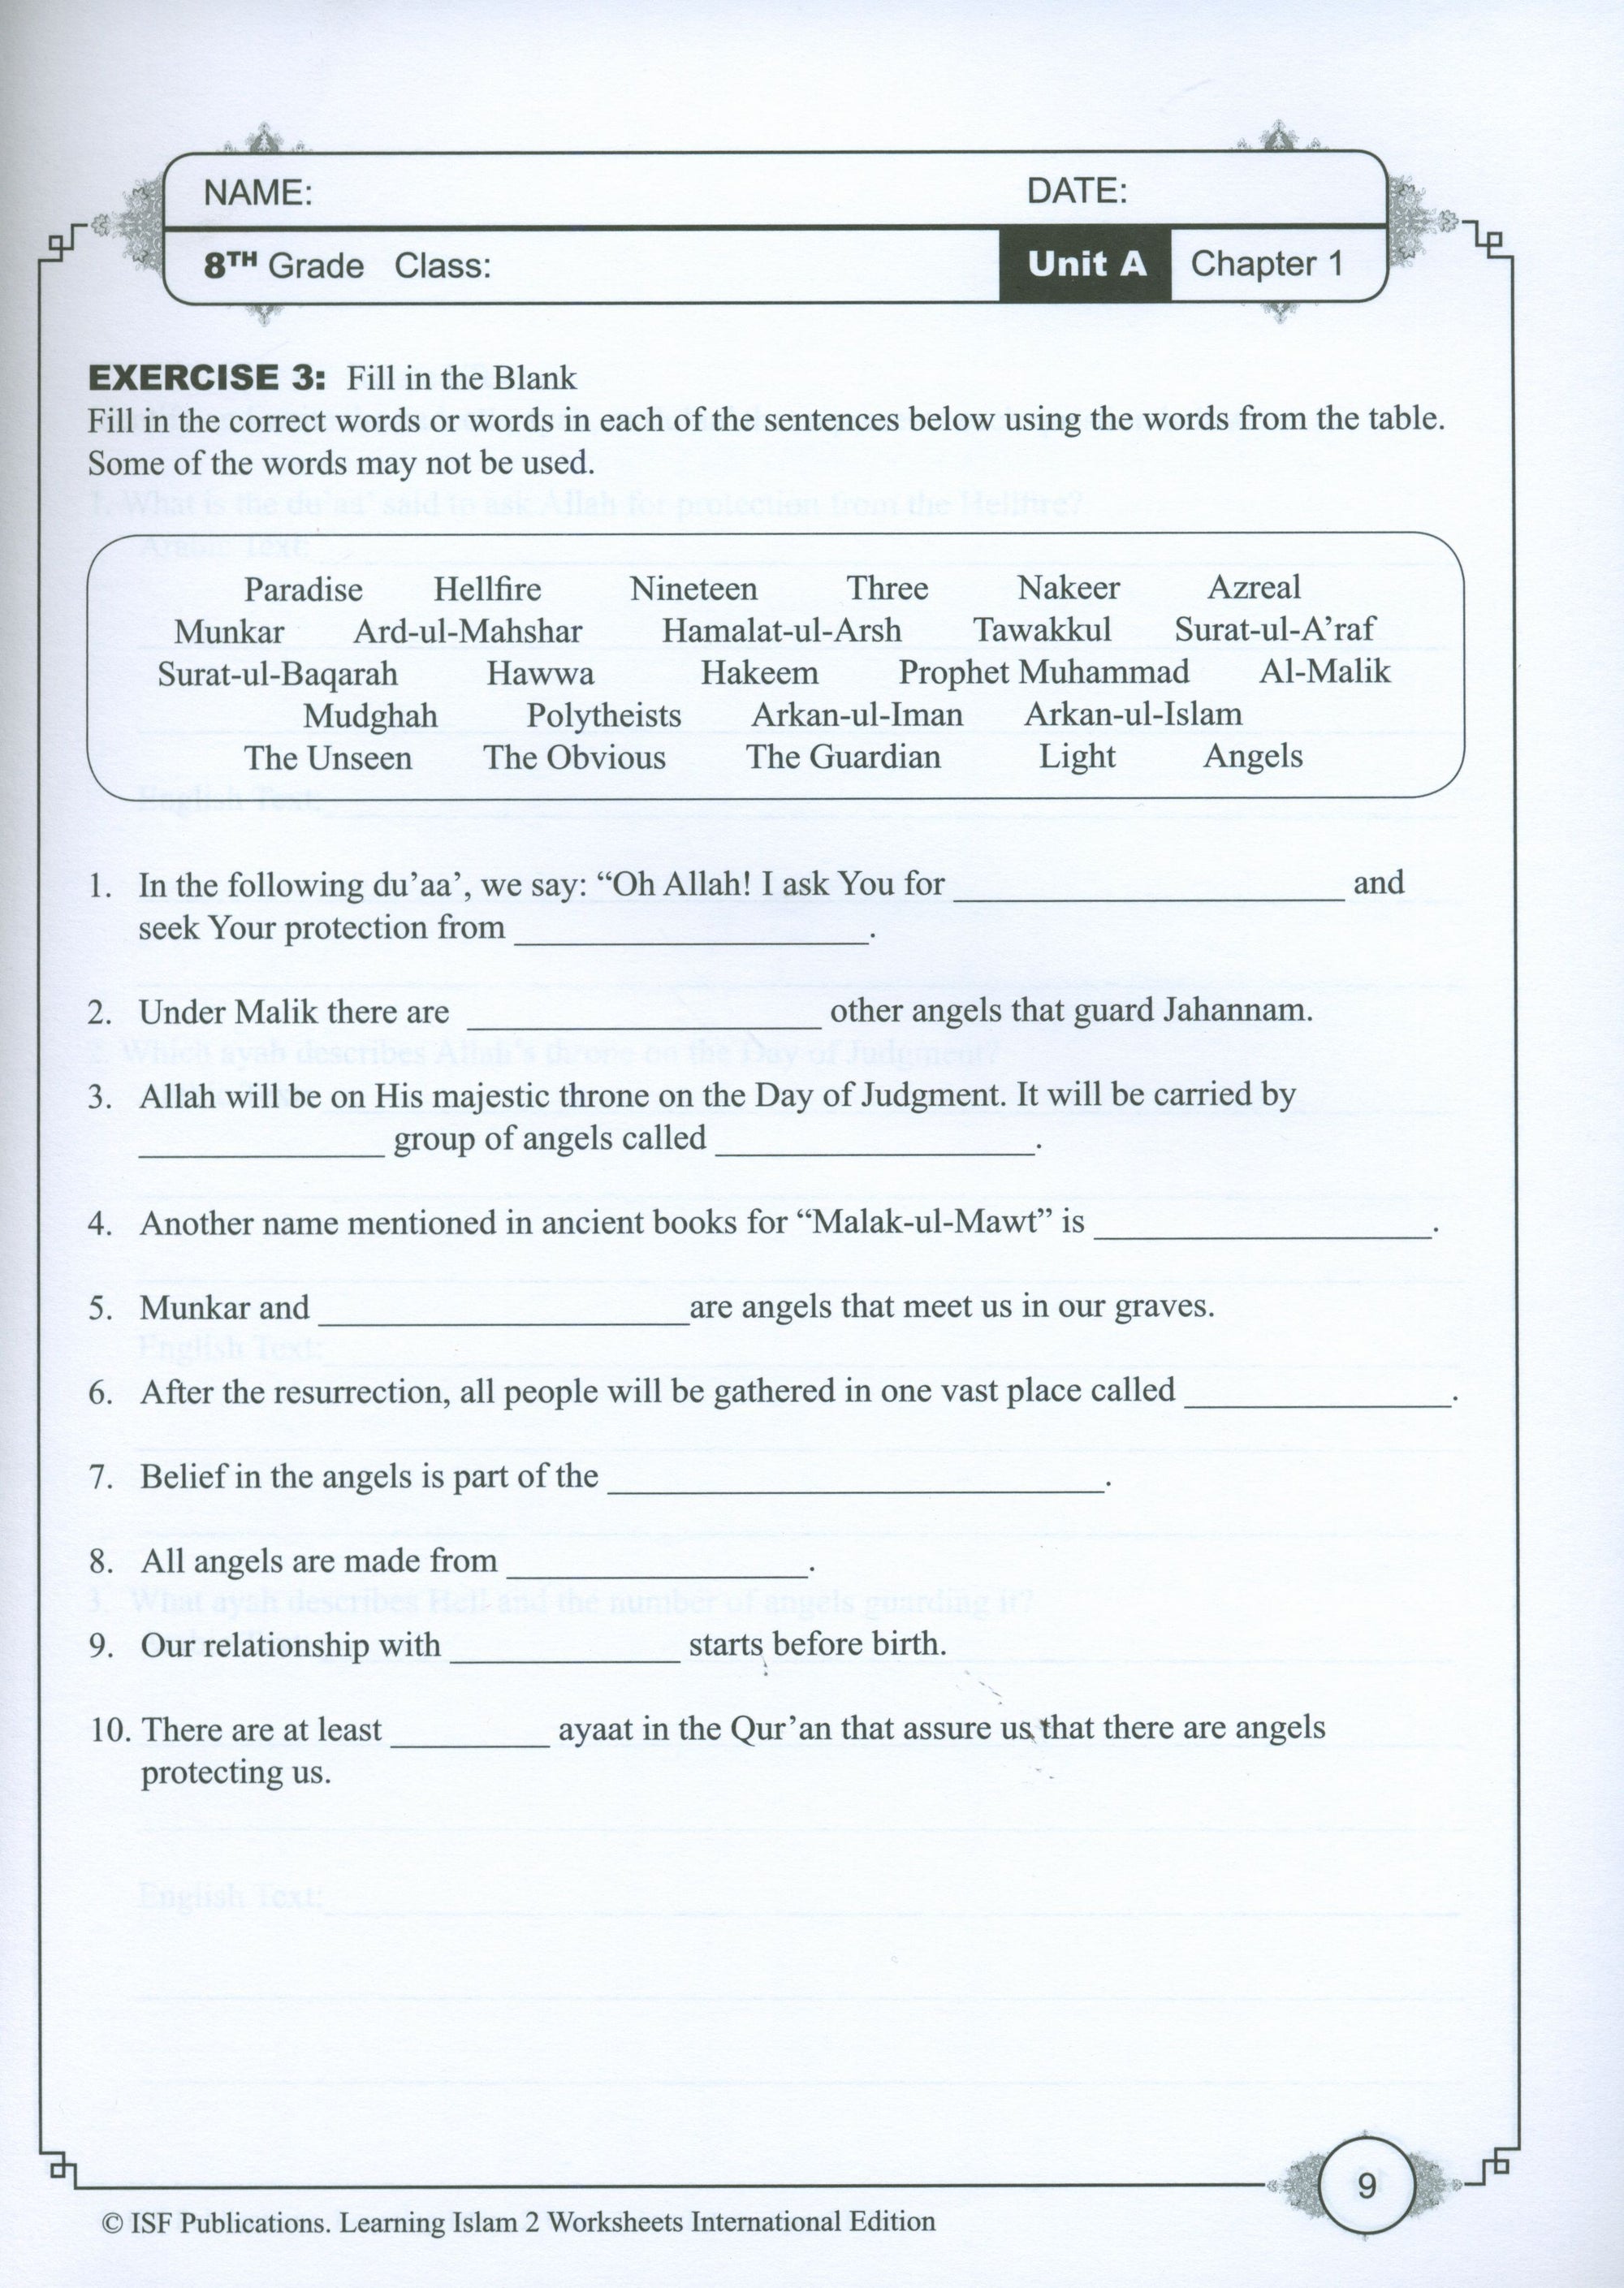 Learning Islam Weekend Edition Worksheets Level 2 (7th Grade)